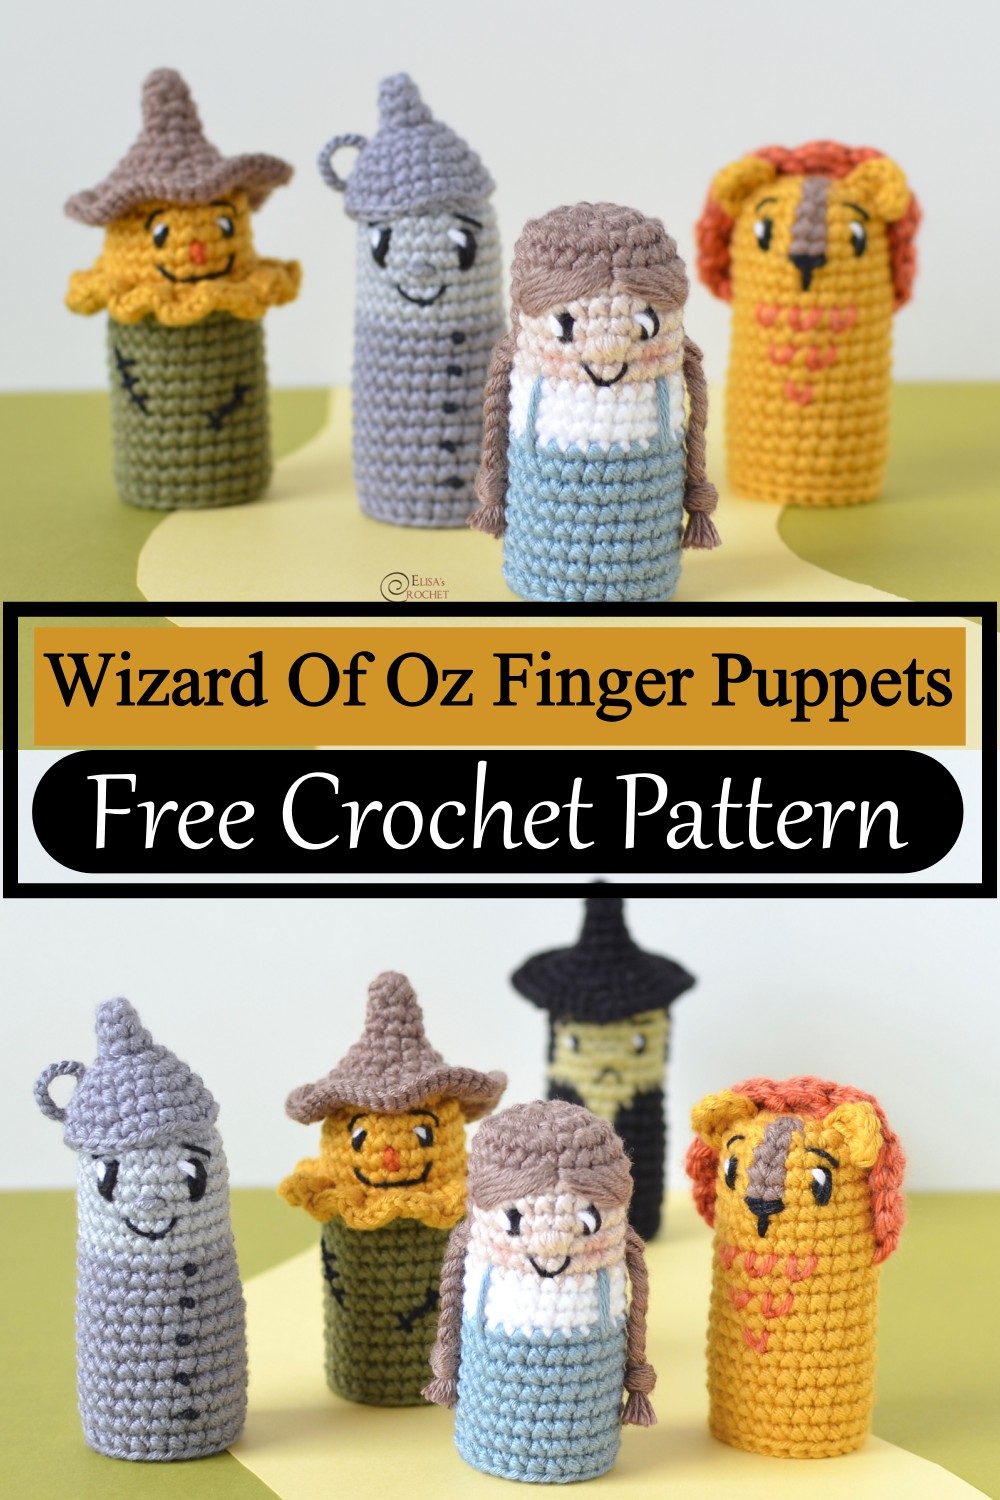 Wizard Of Oz Finger Puppets